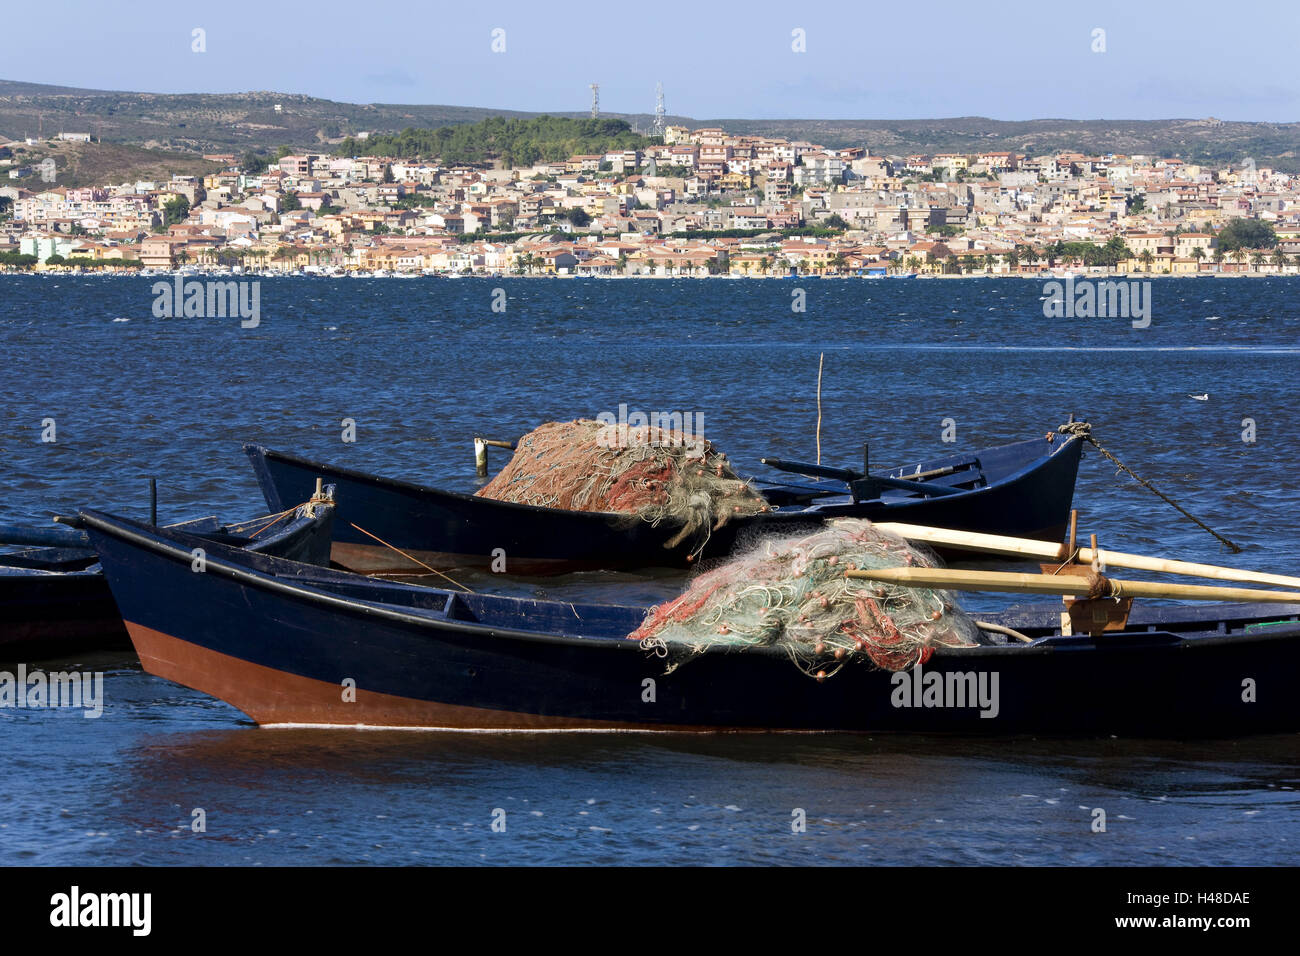 Italy, location Sardinia, fishing boats, sea, view Sant' Antioco, Europe, Southern, Europe, southwest coast, Isola Sant'Antioco, island, neighbouring island, town, town view, coastal town, scenery, coastal scenery, houses, fishing, fish, small boats, boots, networks, fishing nets, oar boots, the Mediterranean Sea, view, view, Stock Photo